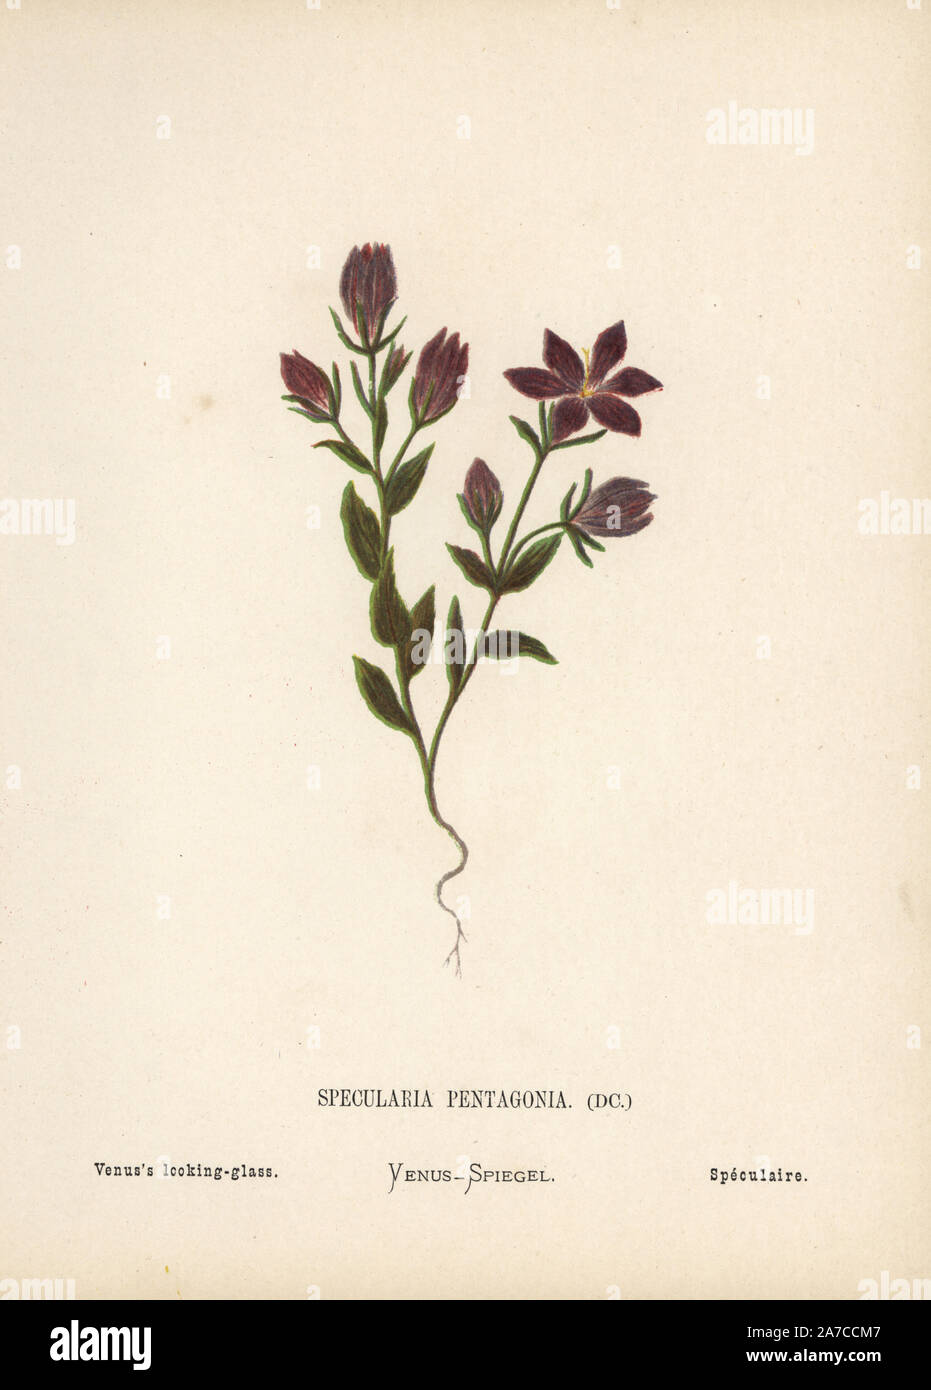 Venus's looking glass, Legousia pentagonia. Chromolithograph of a botanical illustration by Hannah Zeller from her own Wild Flowers of the Holy Land,' James Nisbet, London, 1876. Hannah Zeller (1838-1922) was a Swiss missionary who botanized near Nazareth for many years. Stock Photo